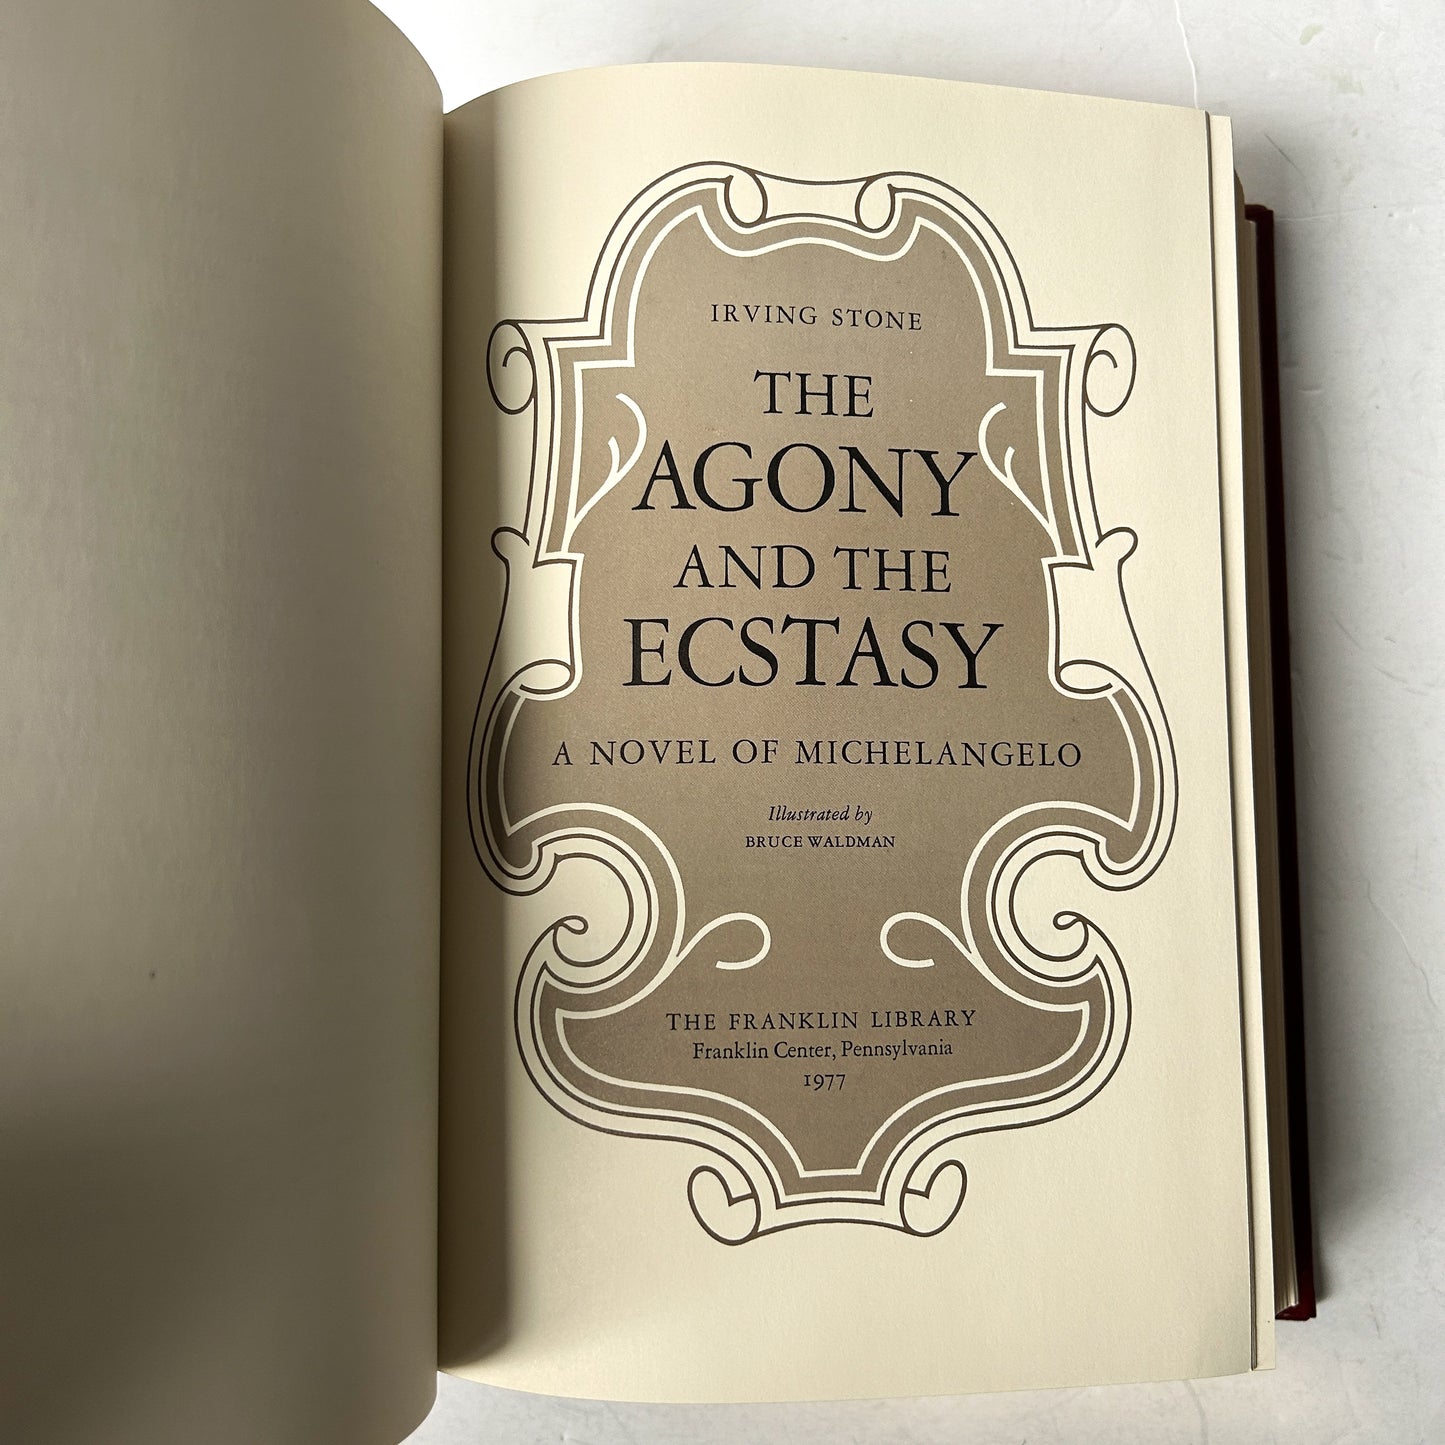 Agony and the Ecstasy by Irving Stone, Signed by the Author, Vintage edition from The Franklin Library